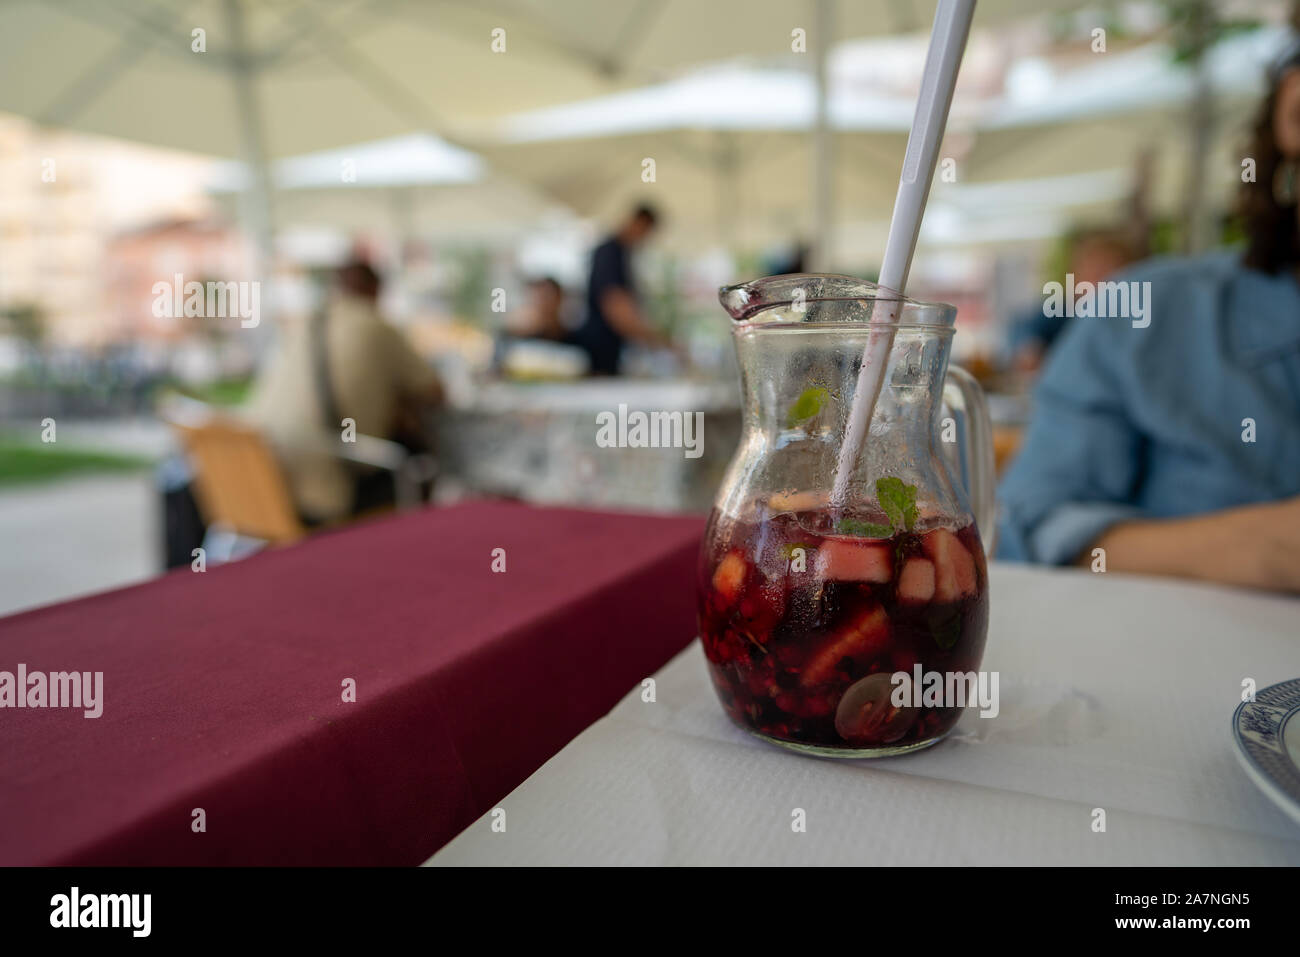 https://c8.alamy.com/comp/2A7NGN5/pitcher-of-red-sangria-on-table-at-restaurant-being-consumed-by-woman-2A7NGN5.jpg